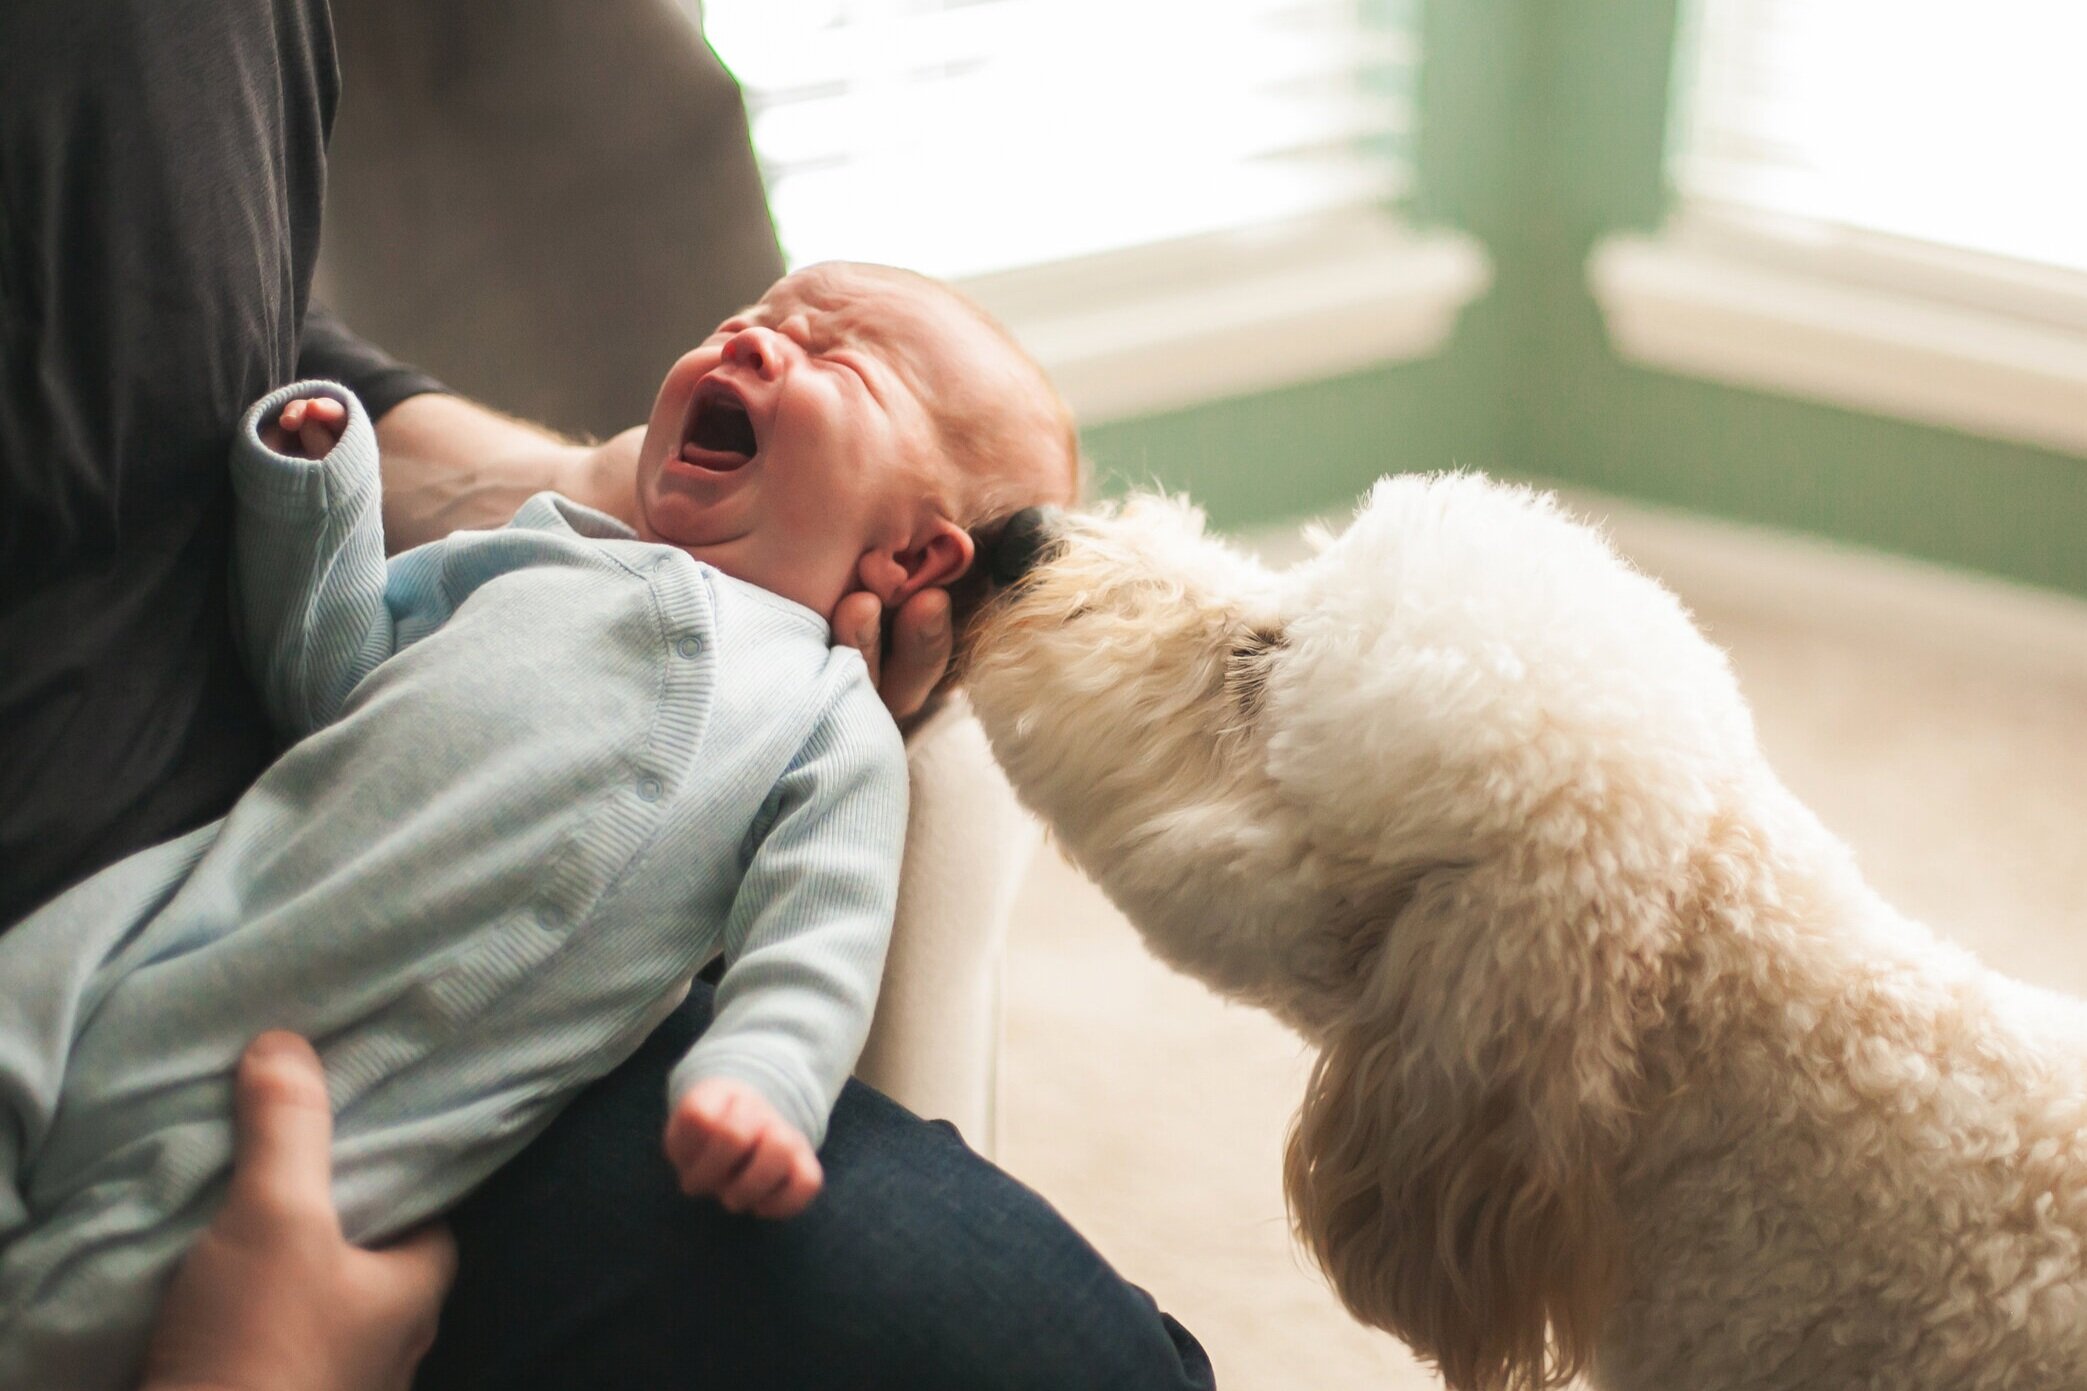 introducing-new-baby-to-pup-dog-crying-baby-new-normal-in-home-lifestyle-session-photographer-fort-worth